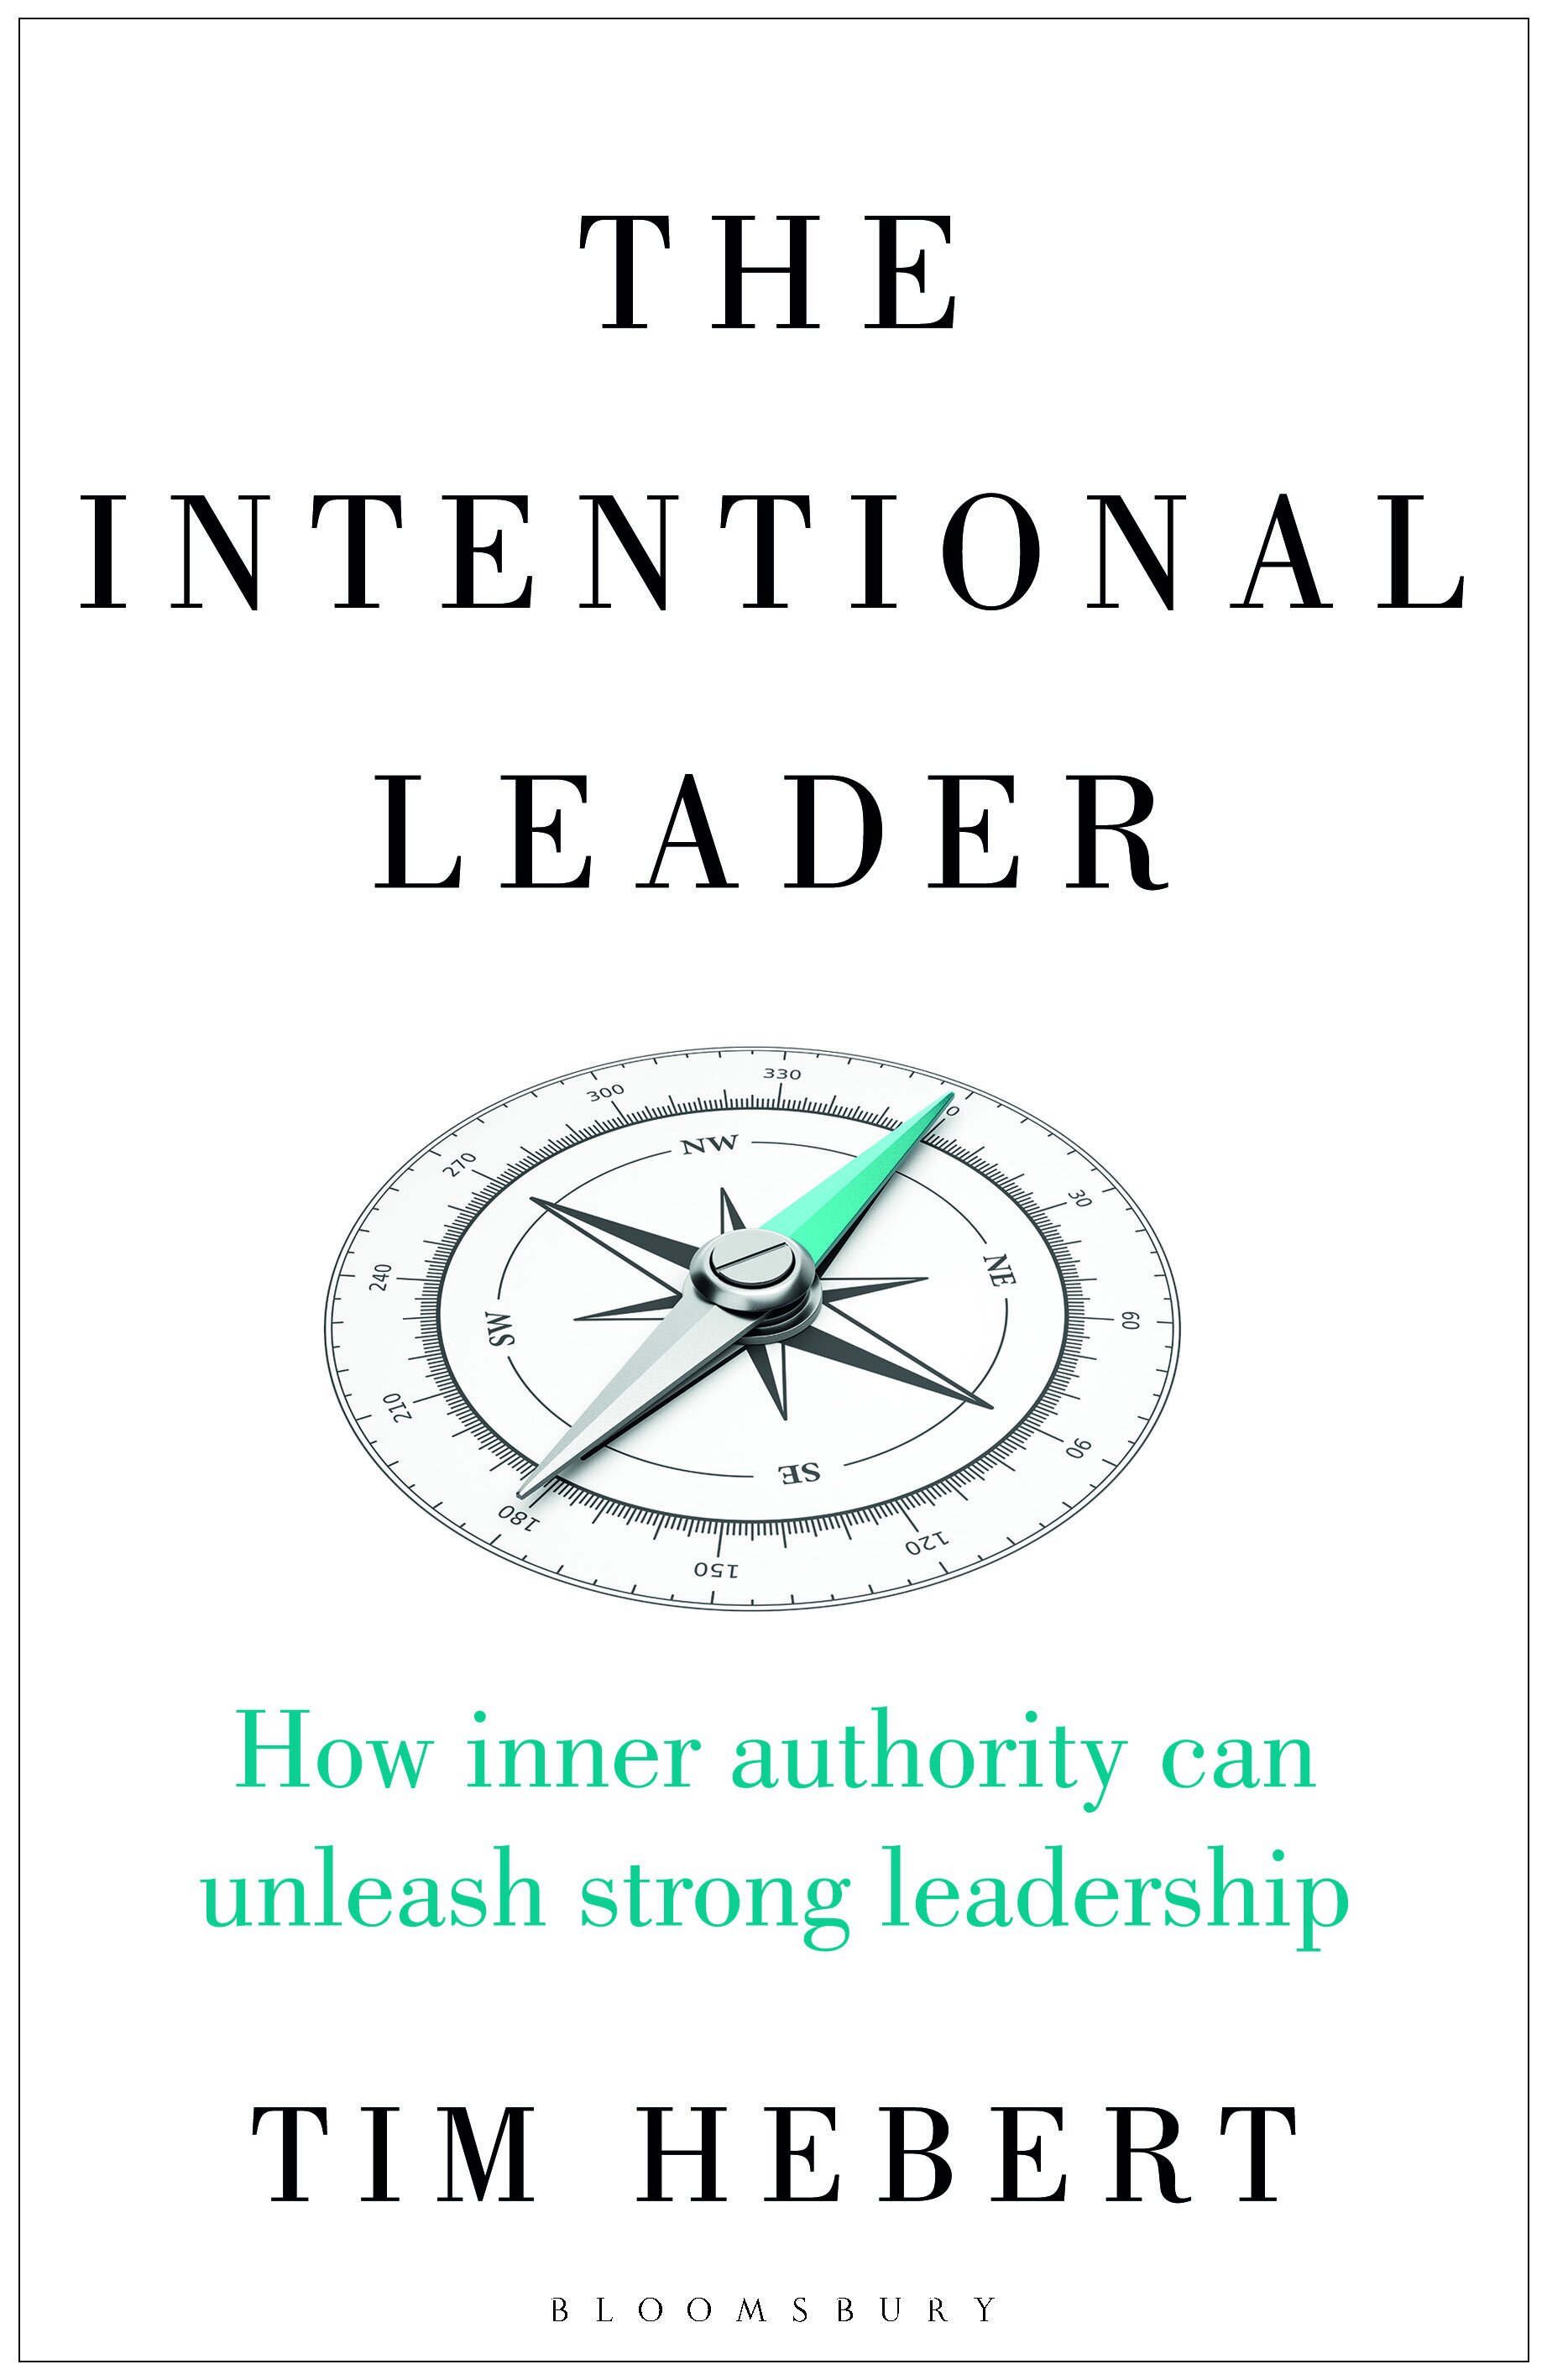 The Intentional Leader by Tim Hebert